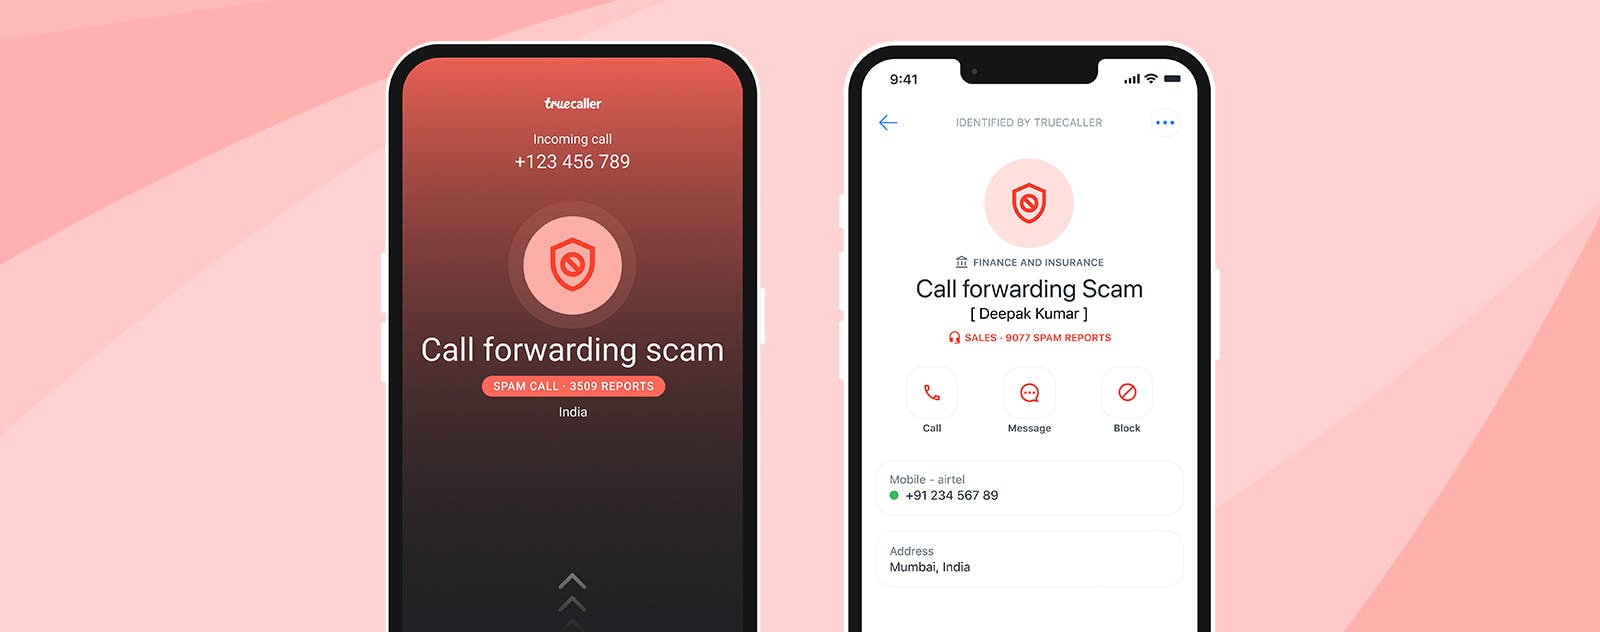 Two phone screens on a background showcasing how the call forwarding scam works